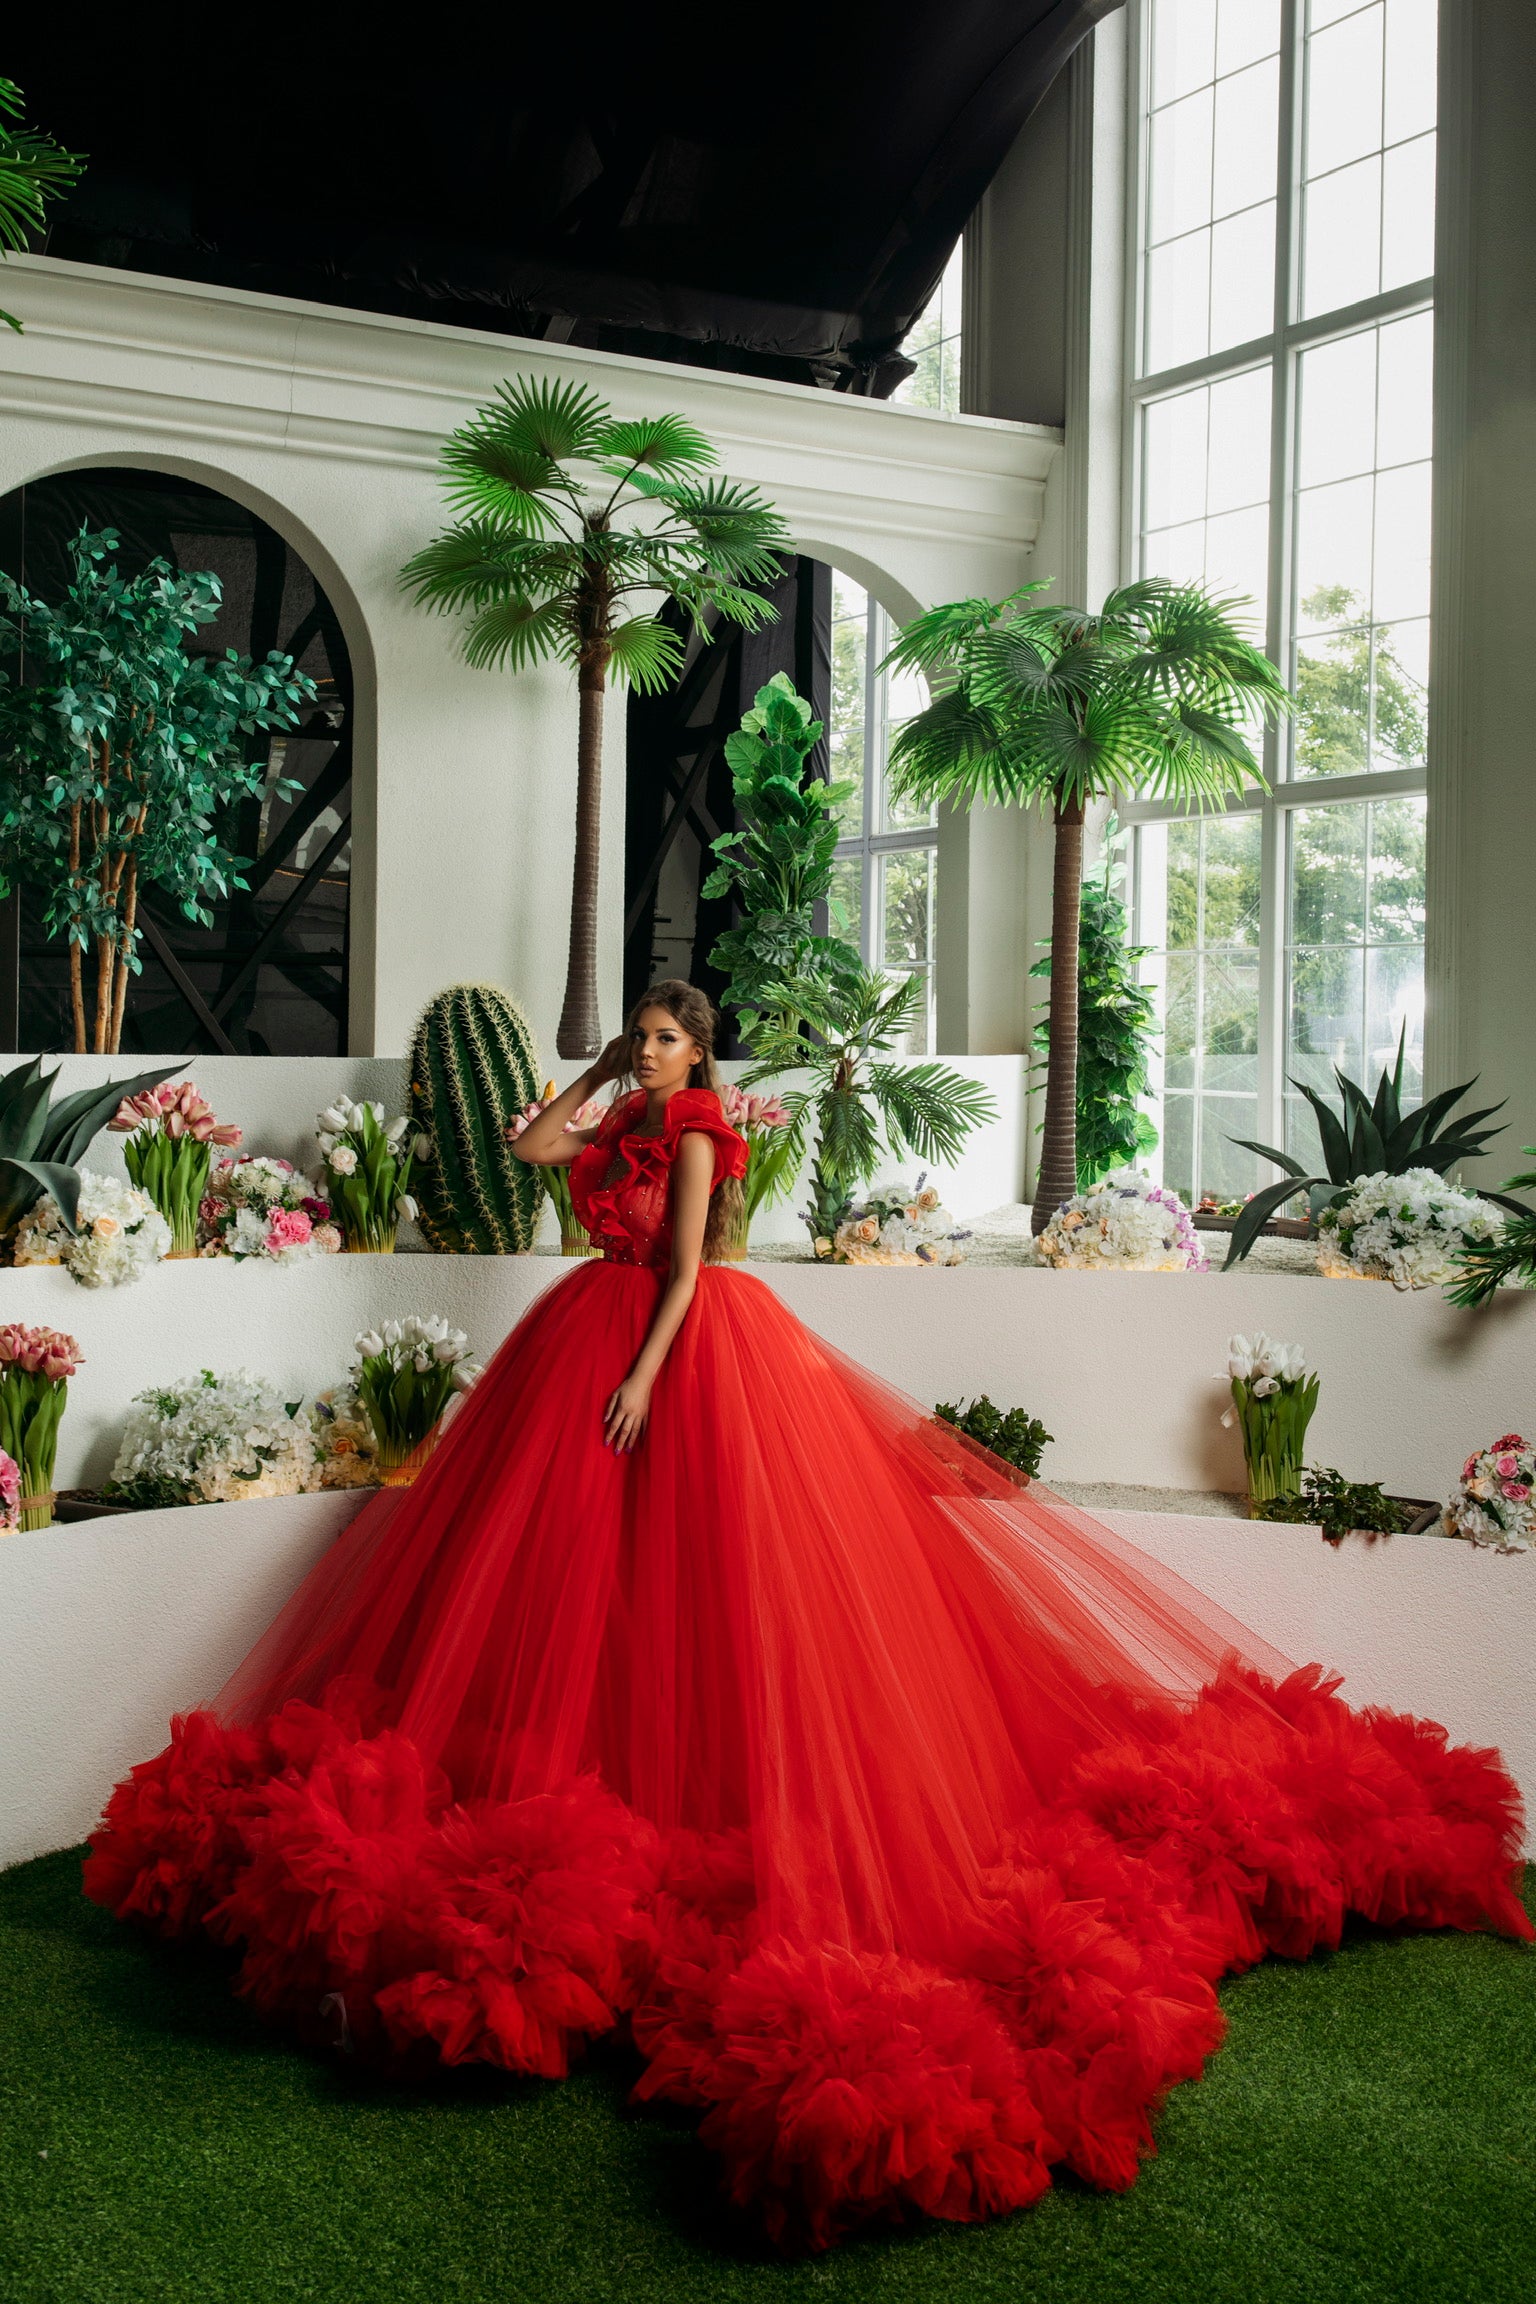 7 Red Wedding Dresses That'll Leave You Re-Thinking White